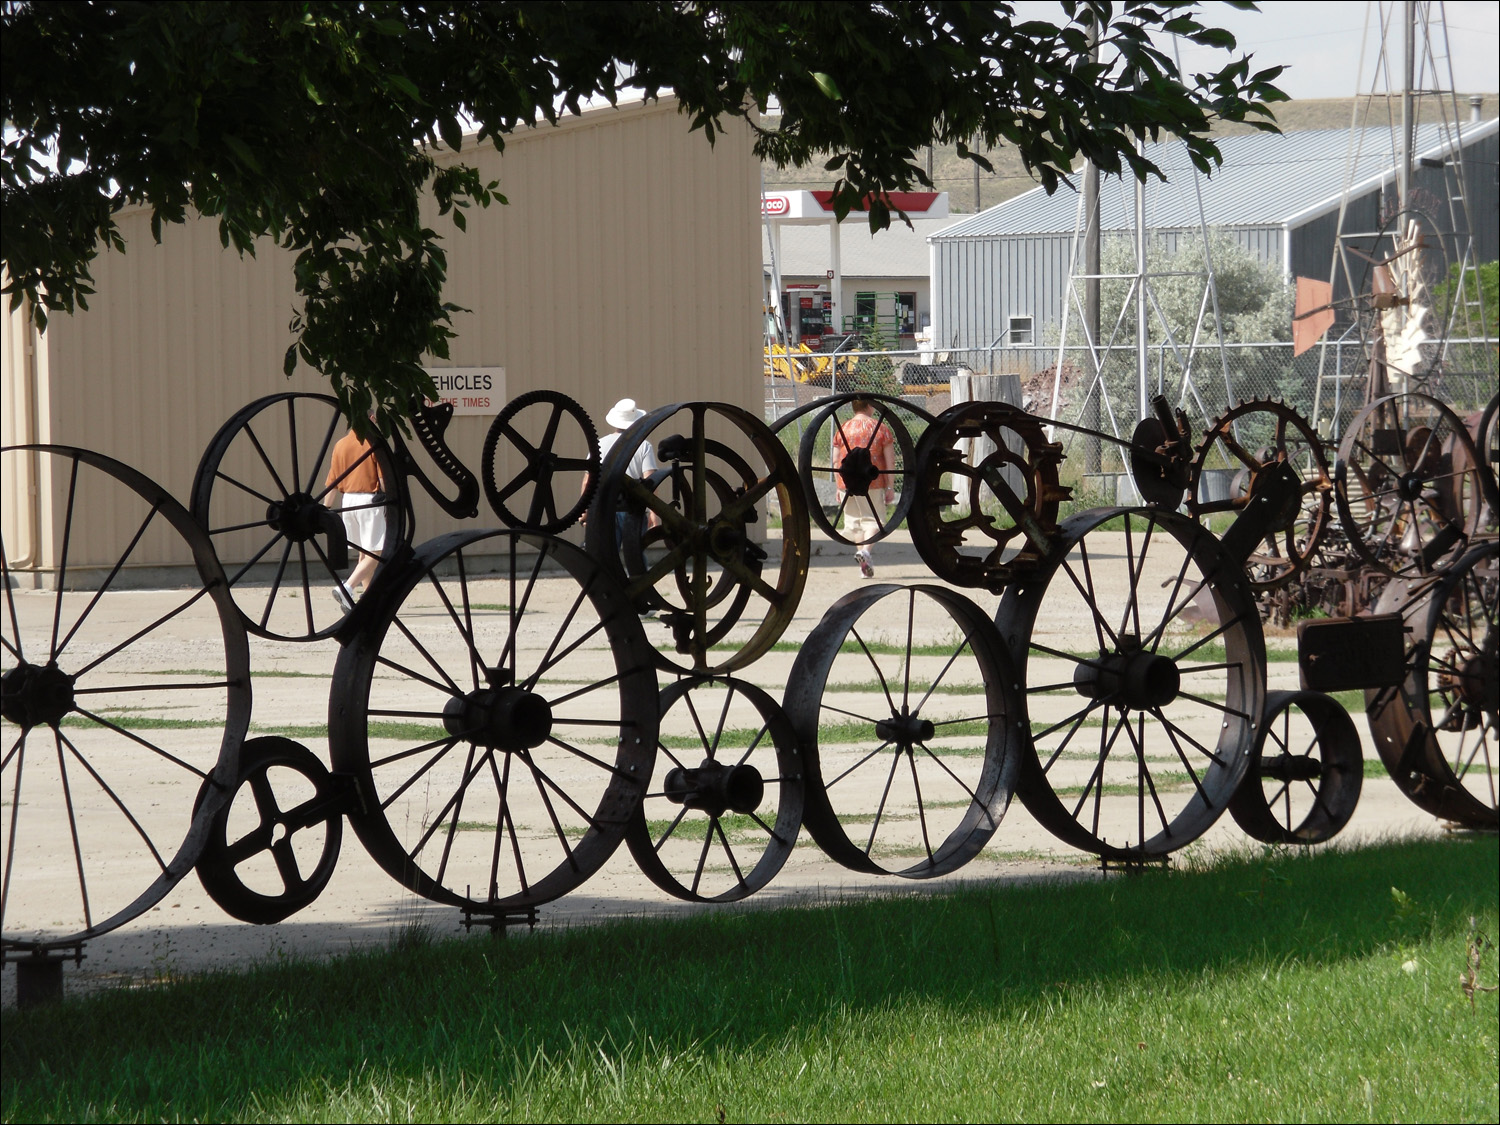 Fort Benton, MT Agriculture Museum-old iron wheel fence